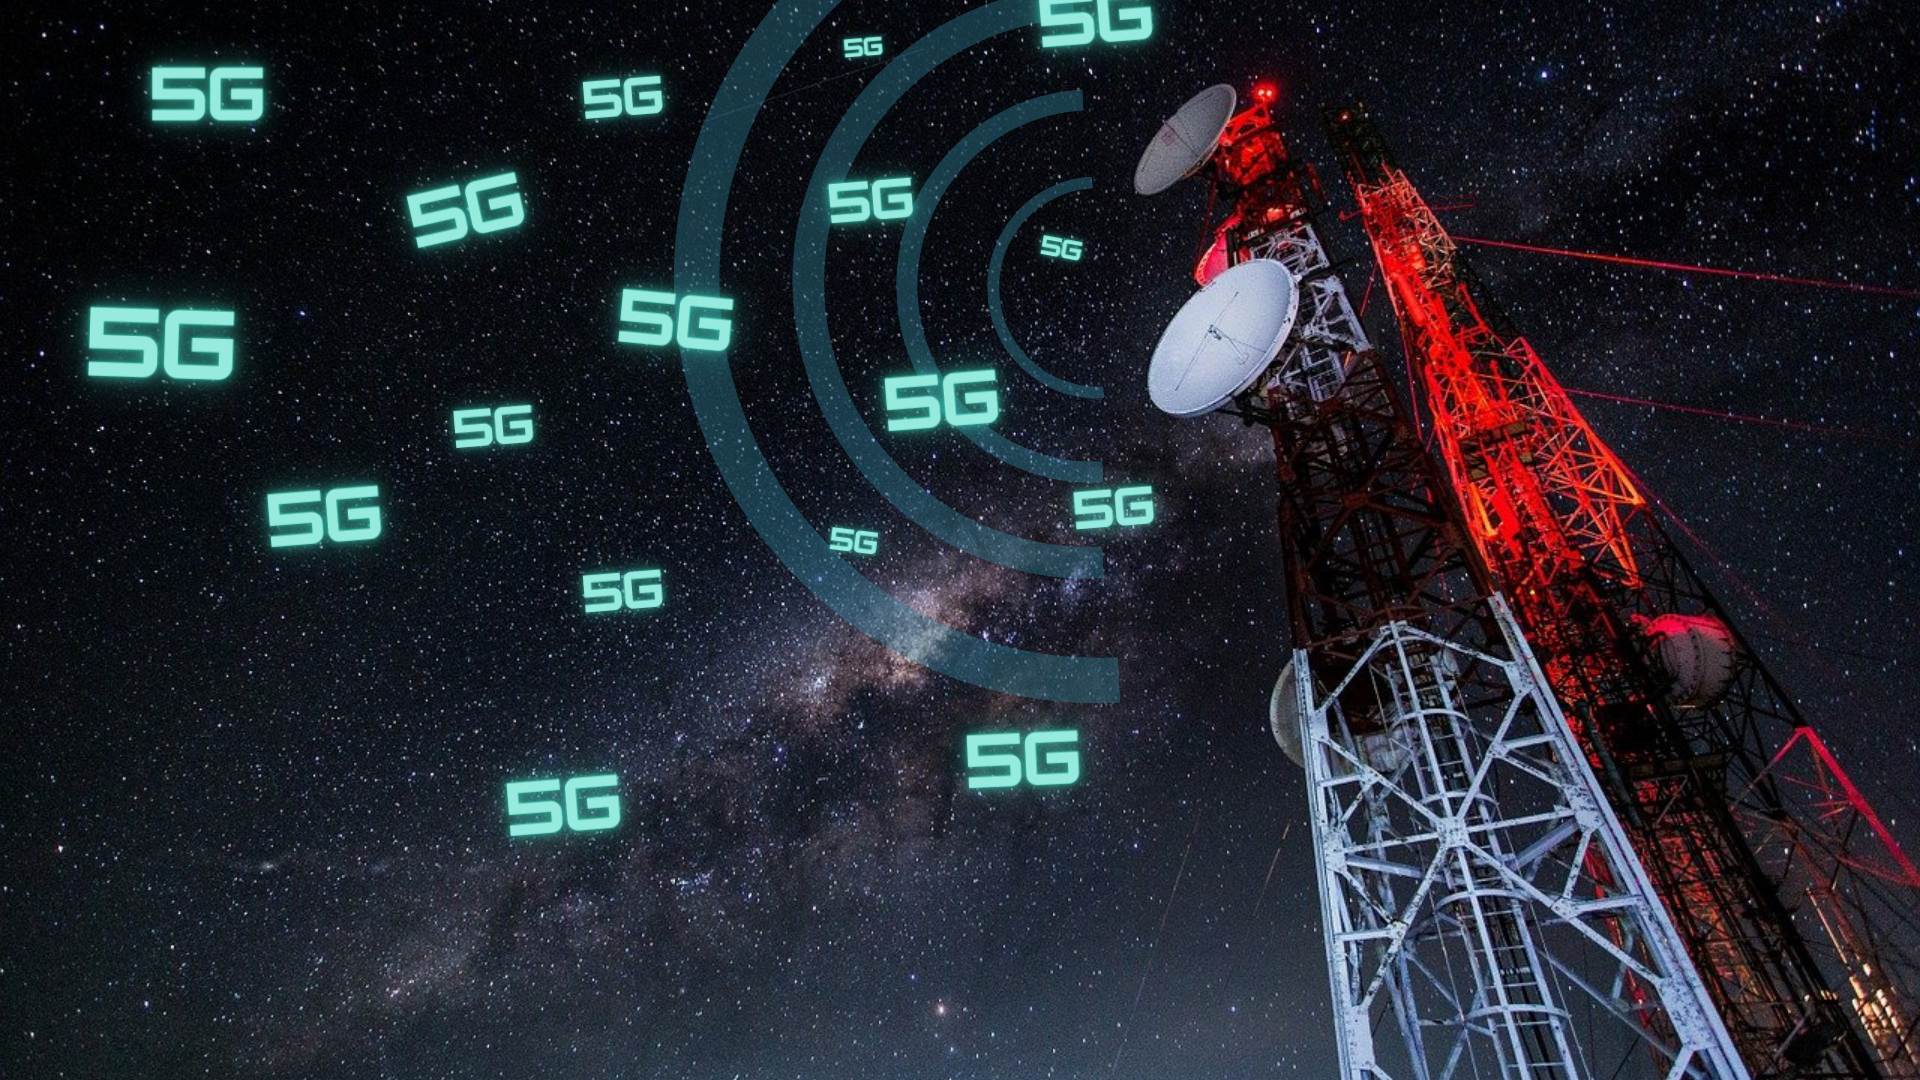 5G cell tower feeds conspiracy theories people think they need protection with usb stick